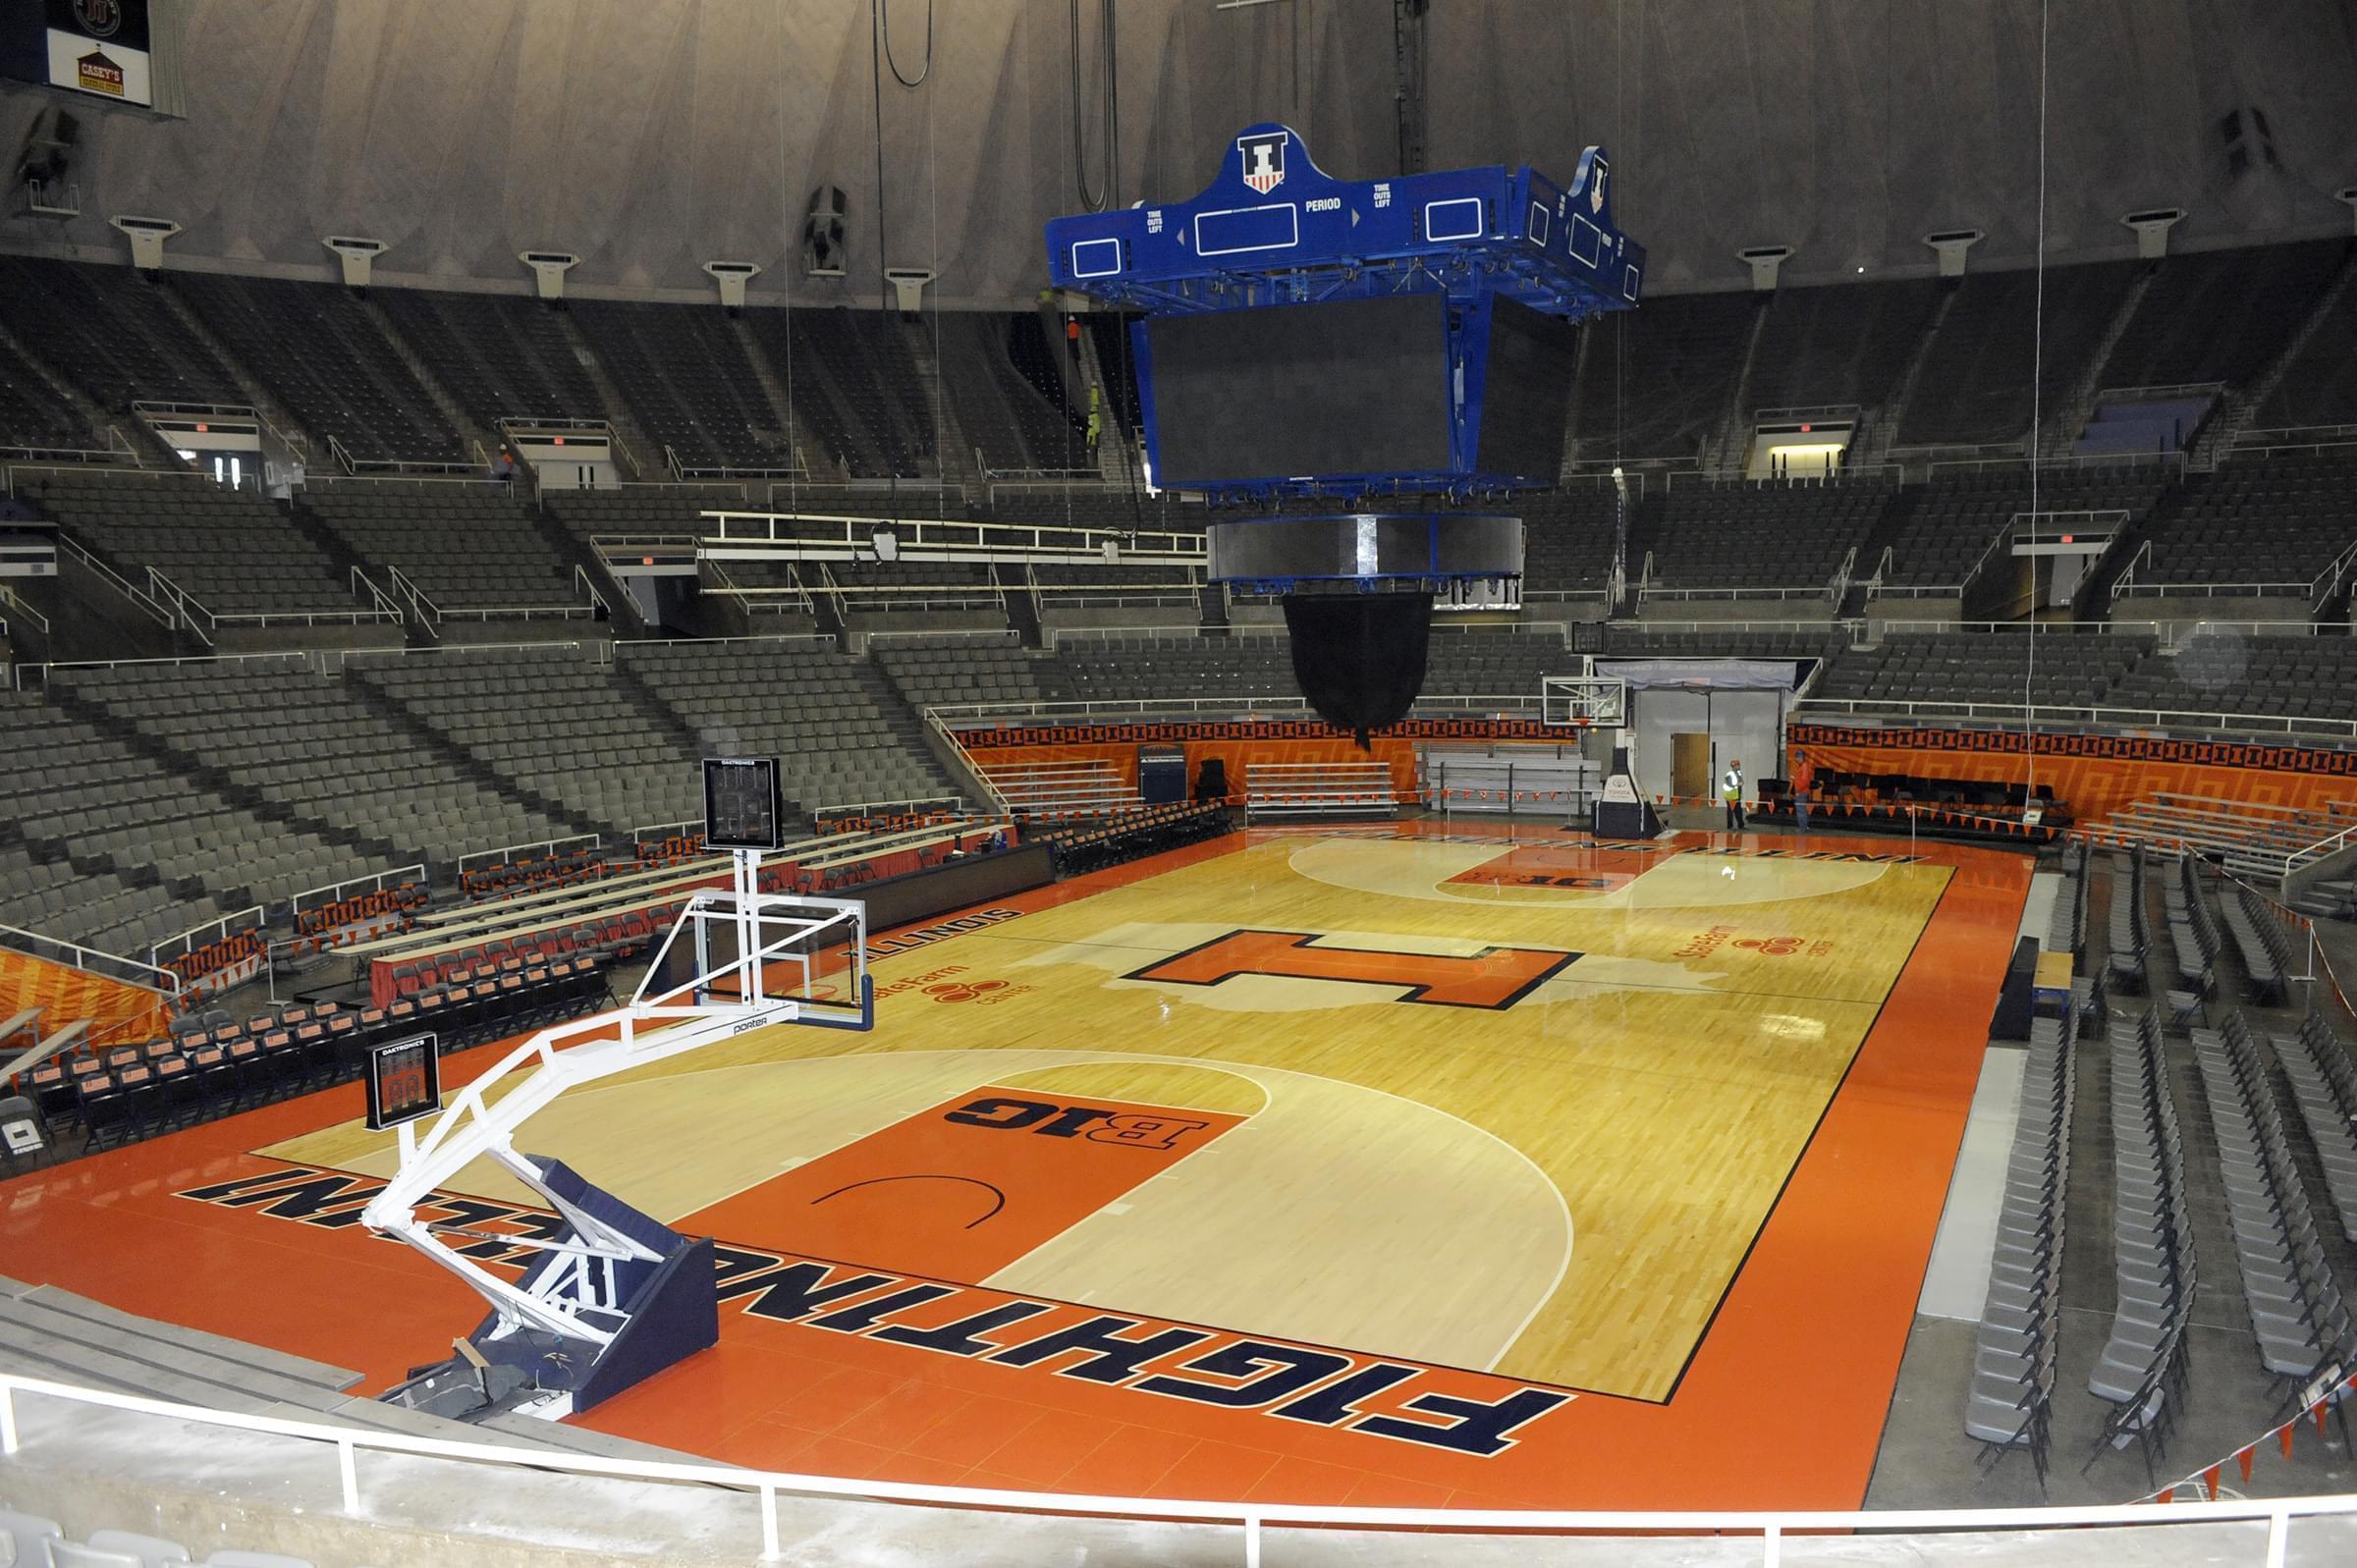 Illini Basketball Court Not Damaged By Water | News Local ...